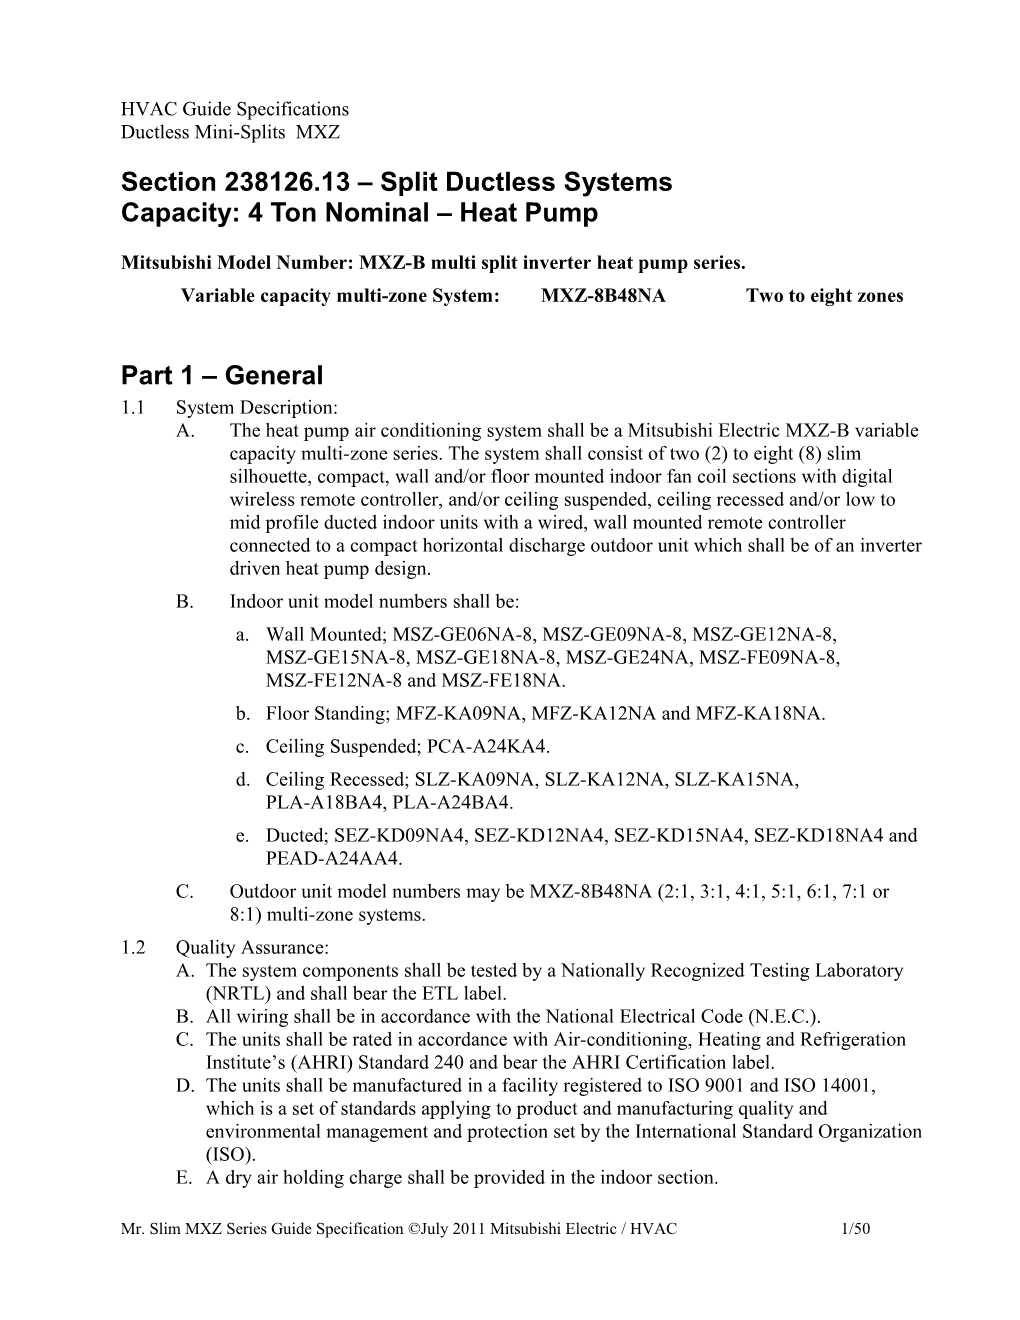 HVAC Guide Specifications s4